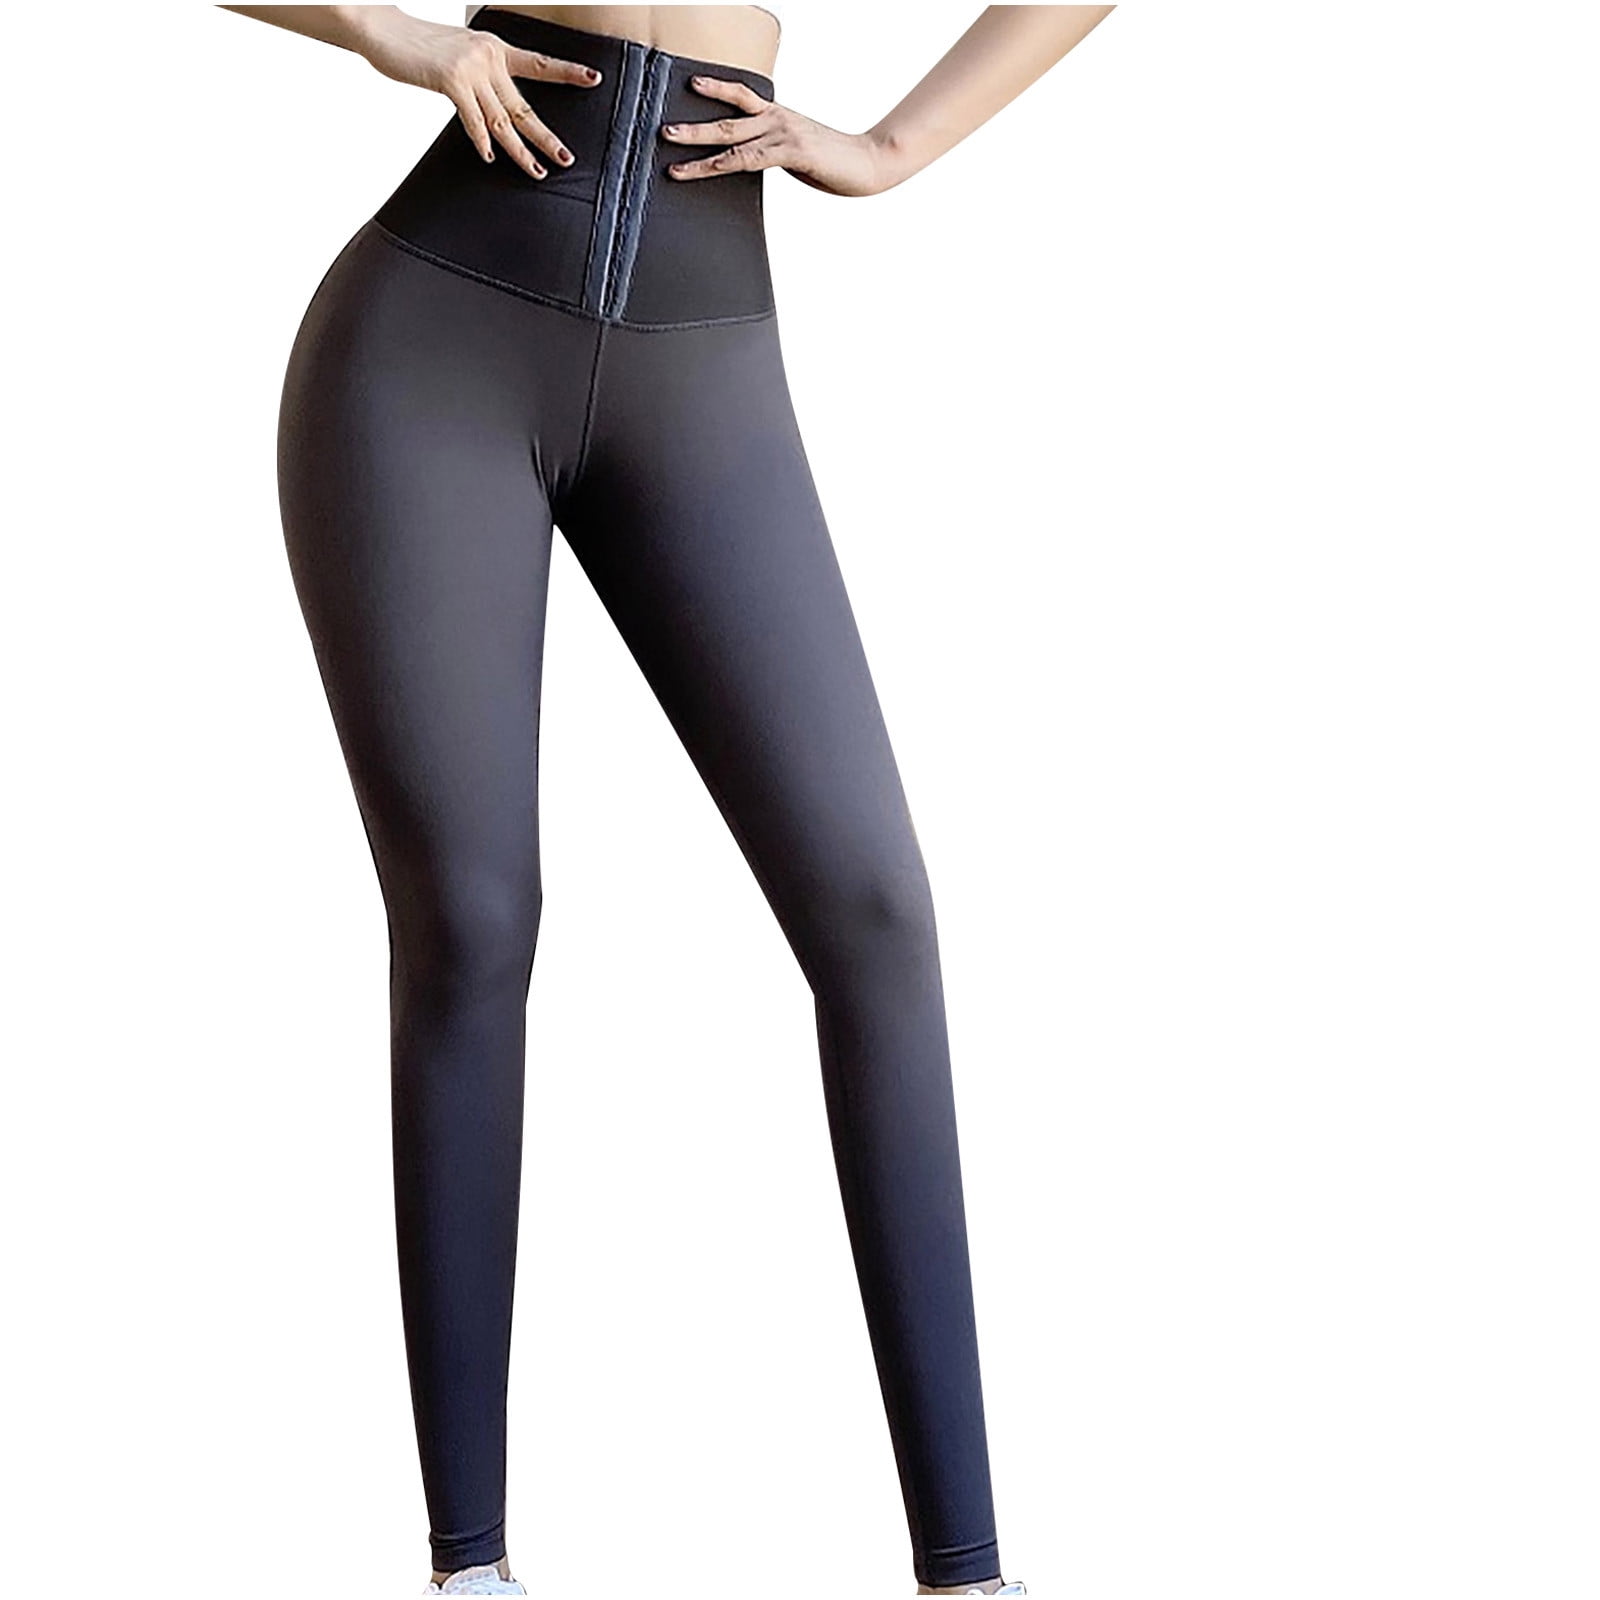 MEJING Plus Size Workout Leggings for Women with Pockets Black Yoga Pants  Tummy Control Mesh High Waist Gym Clothes Athletic Leggings Stretchy Tights  Maternity Activewear Butter Soft 7/8 Black 4XL : 